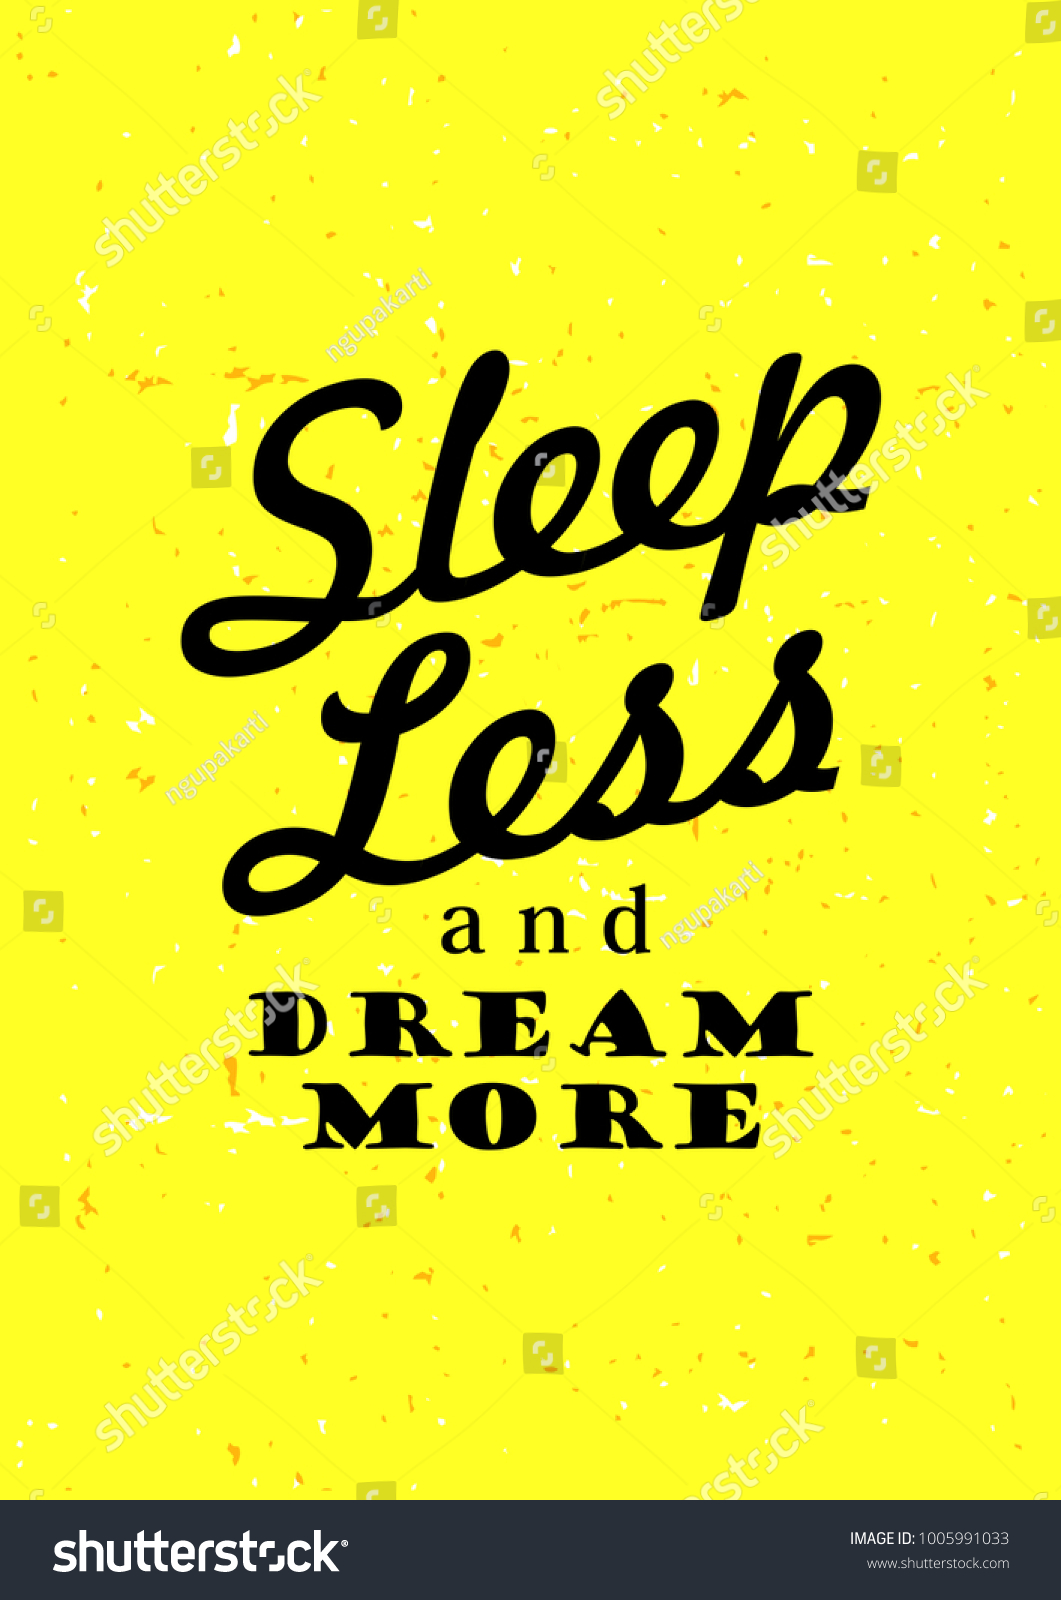 Sleep Less Dream More Motivational Poster Stock Vector (Royalty Free ...